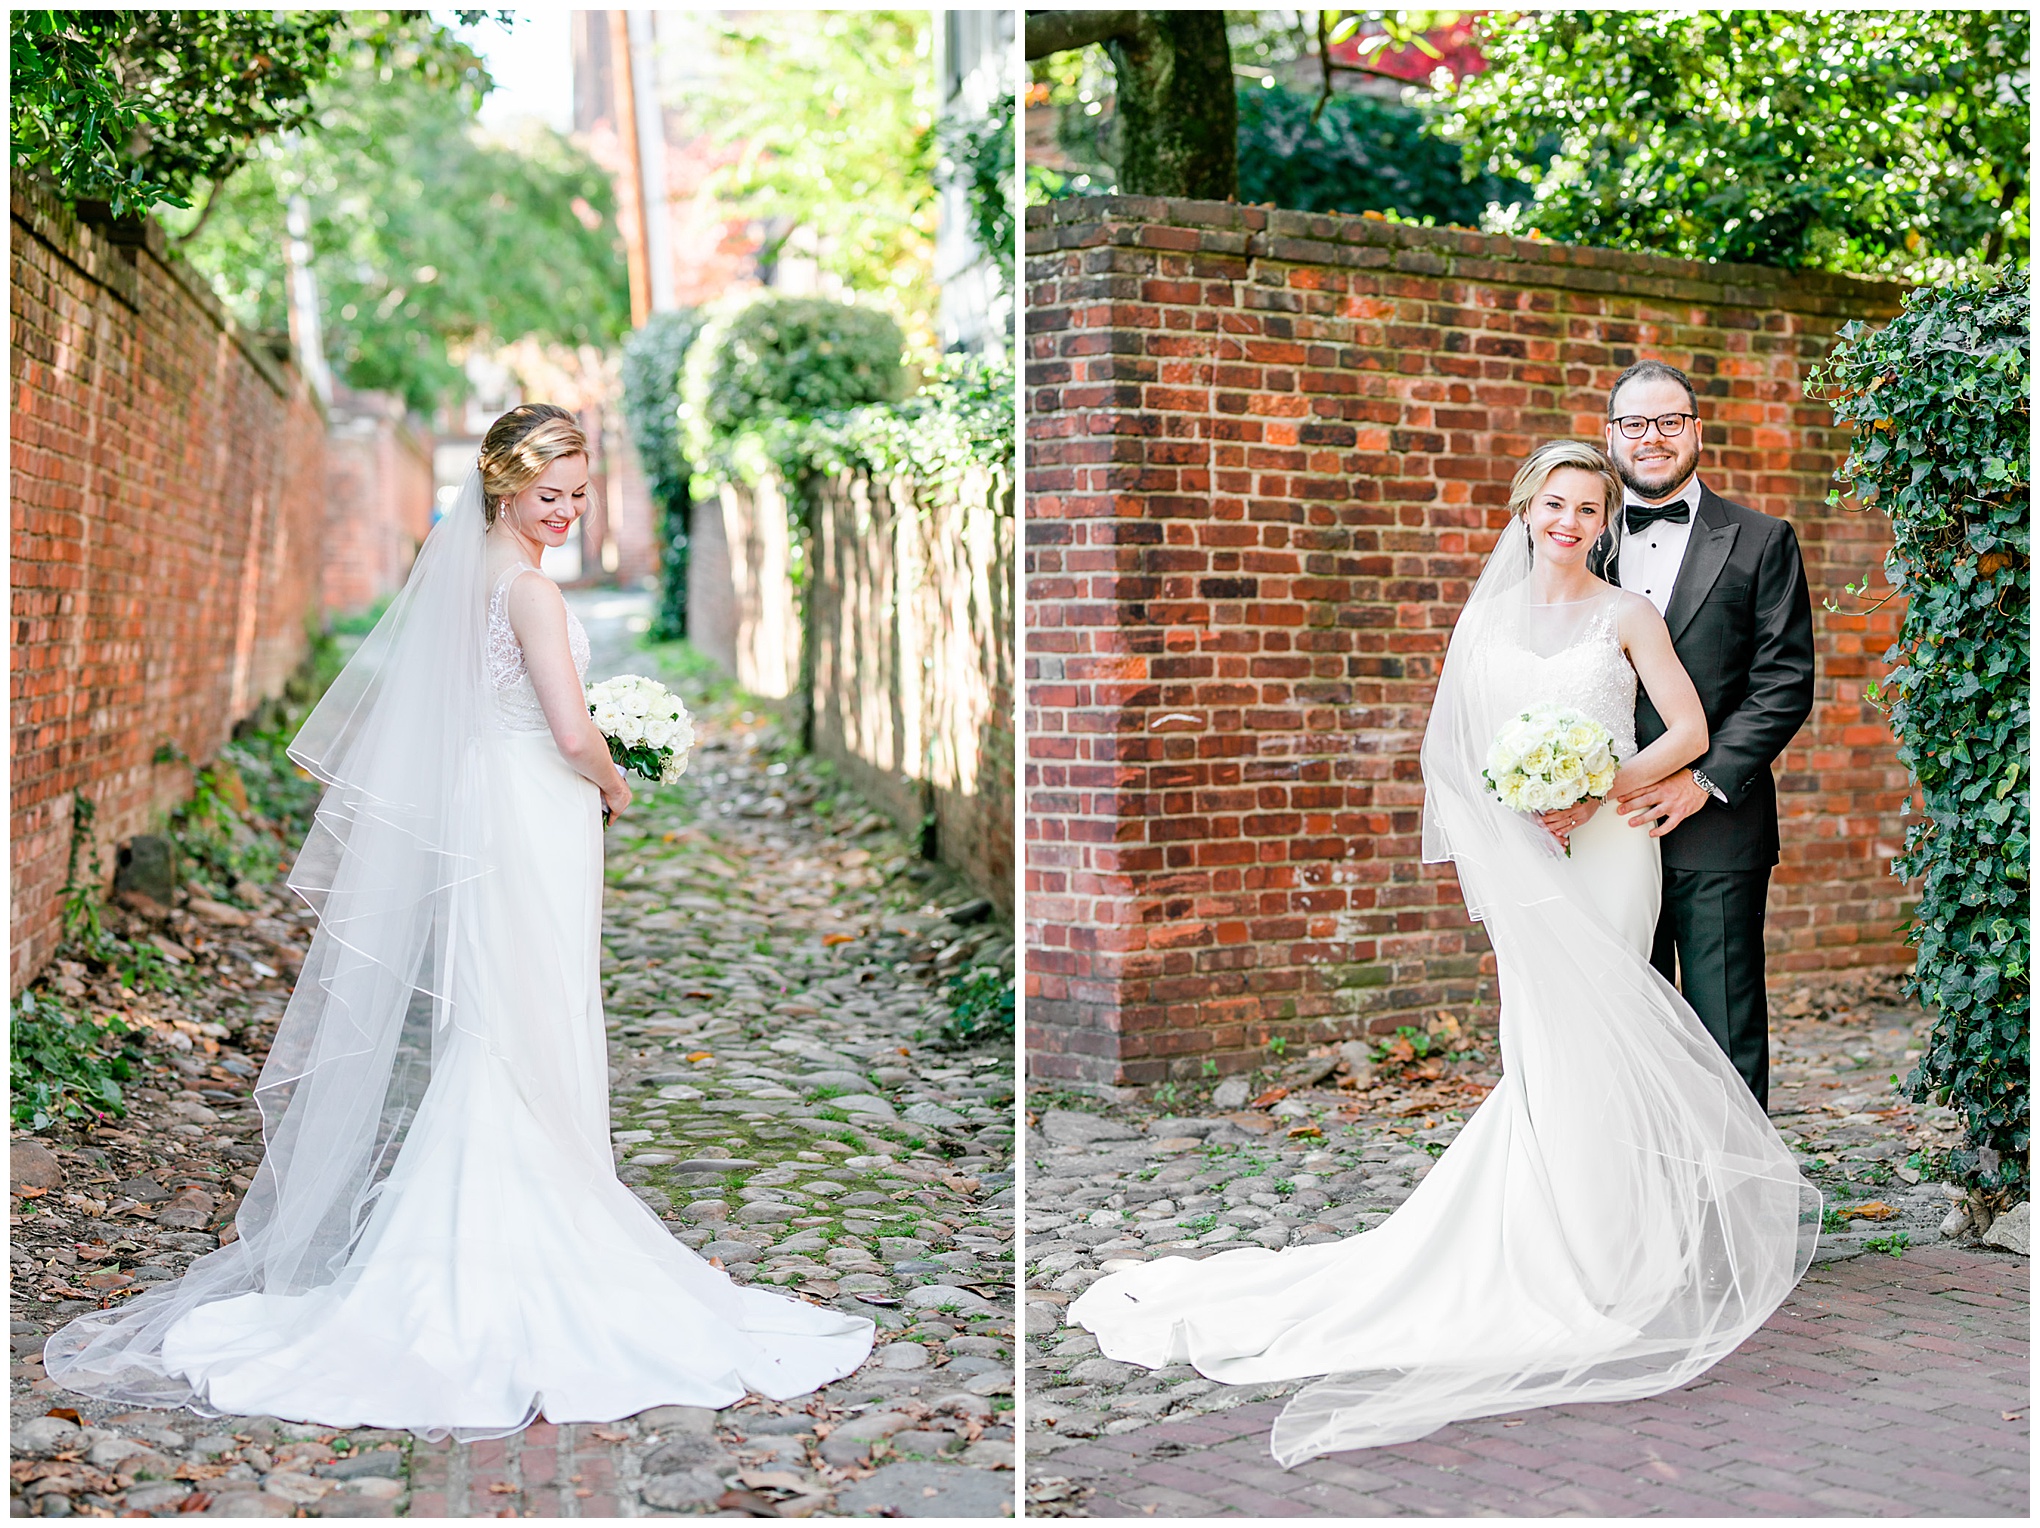 autumn Old Town Alexandria wedding, Old Town photographer, Alexandria wedding photographer, Northern Virginia wedding photographer, DC wedding photographer, Rachel E.H. Photography, autumn wedding, early autumn wedding, warm weather wedding, white aesthetic, classic wedding aesthetic, classic bride and groom, magic hour portraits, bridal portrait